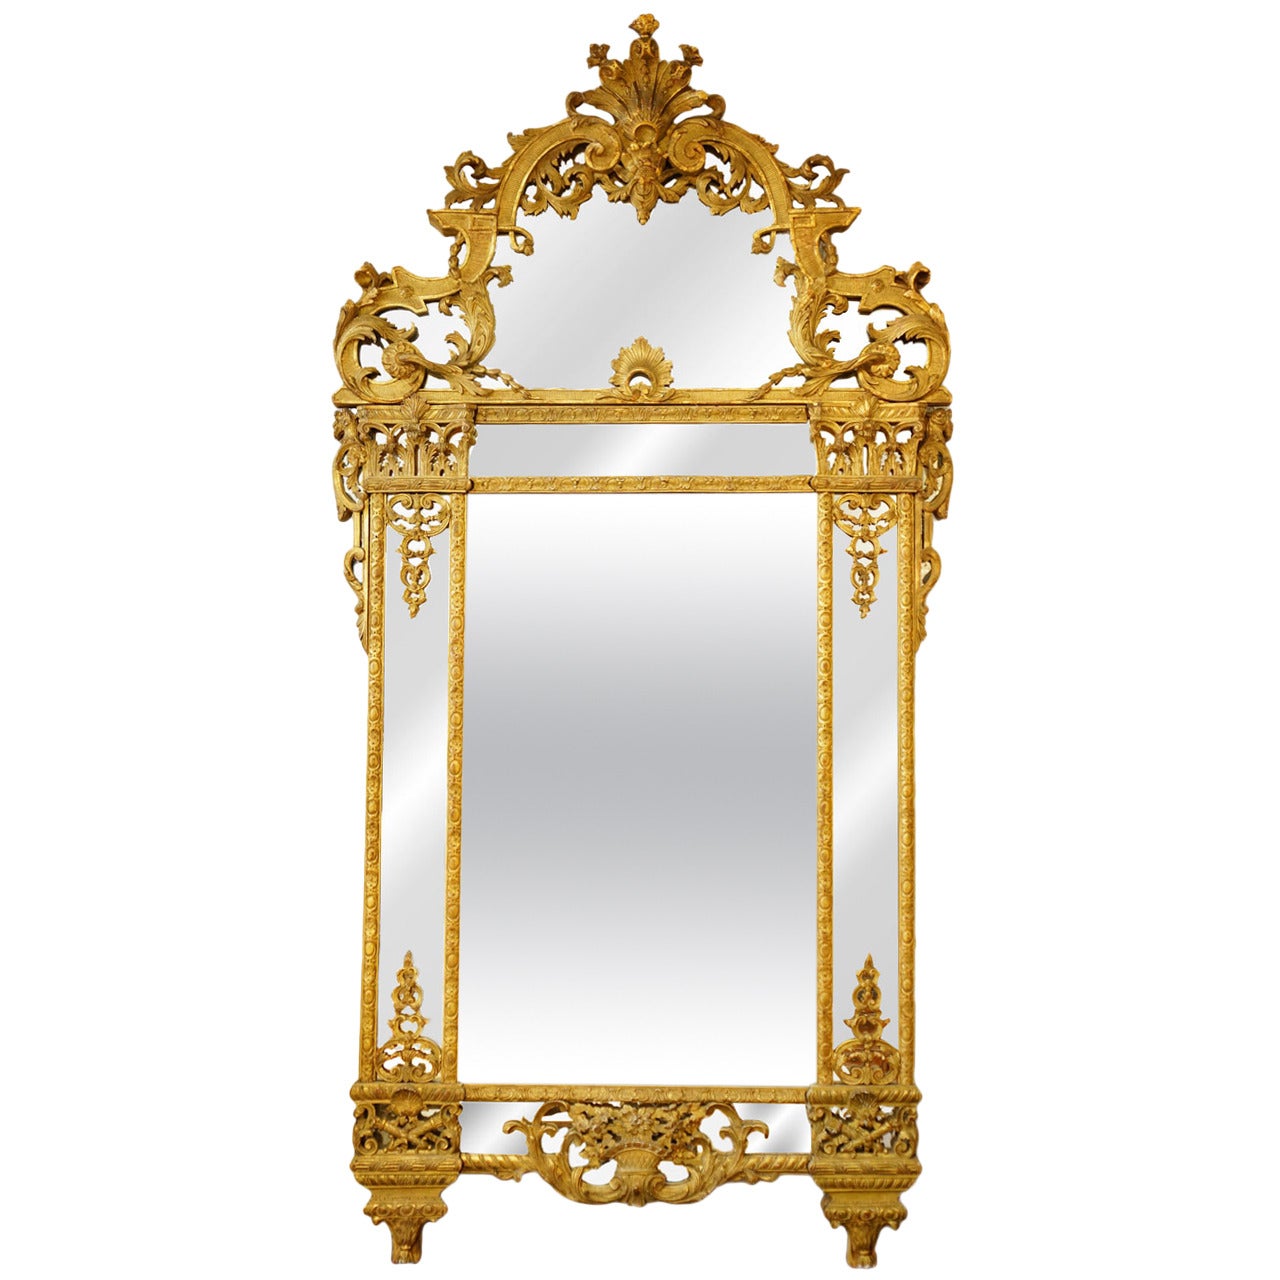 17th Century French, Louis XIV Gold Gilt Mirror For Sale